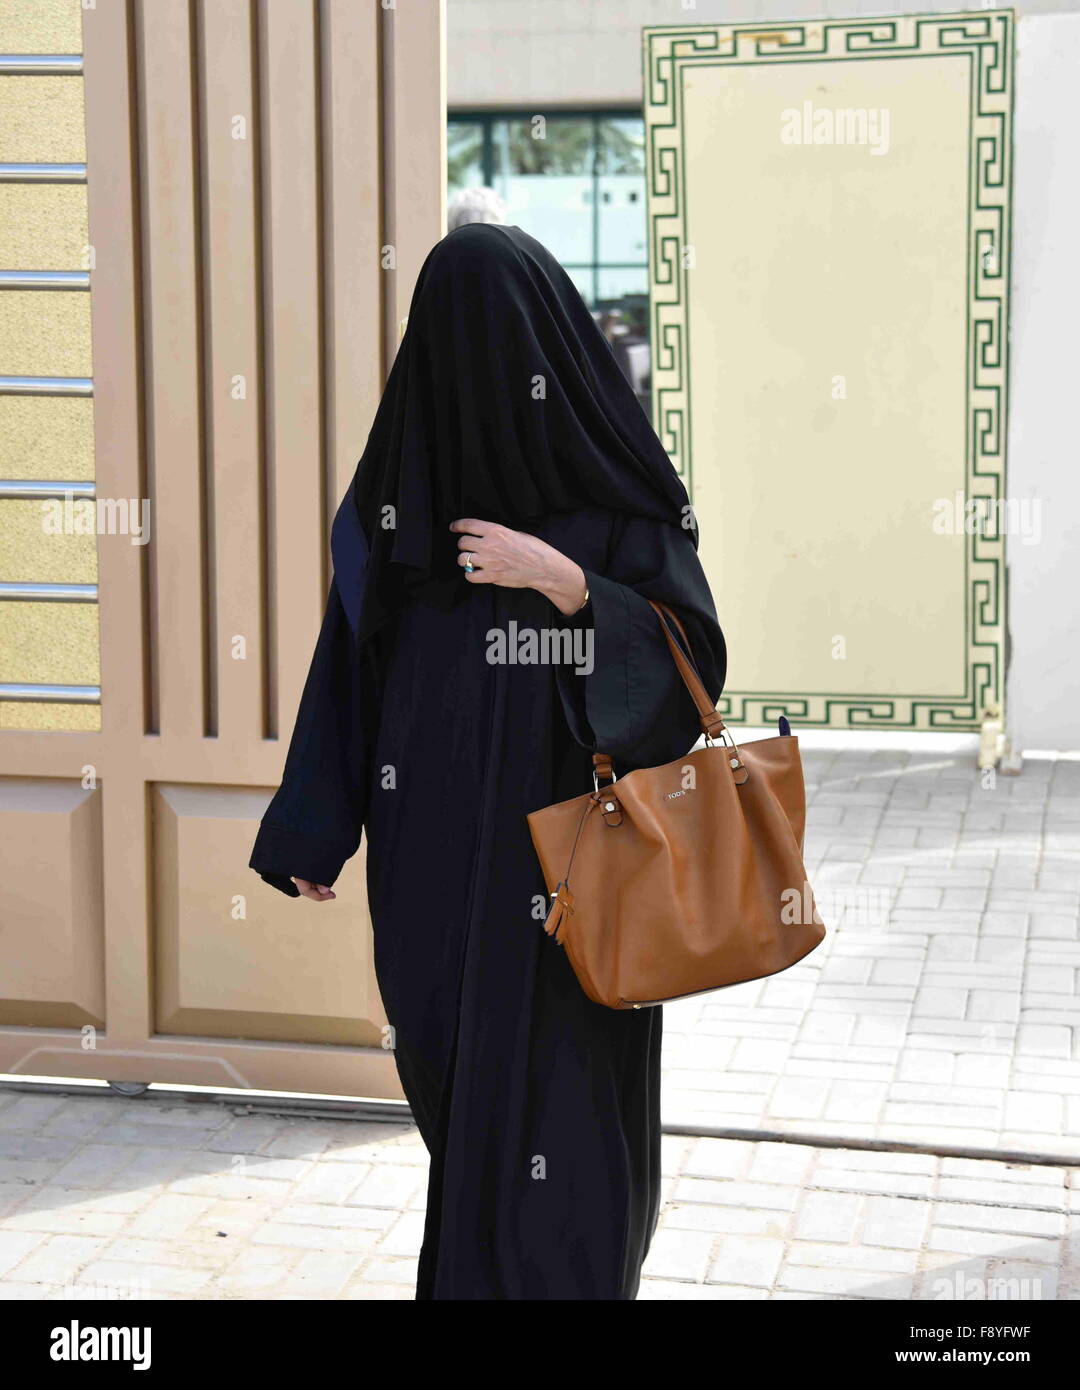 Riyadh, Saudi Arabia. 12th December, 2015. A woman walks out of a polling station after casting her vote for municipal elections in Riyadh, Saudi Arabia, Dec. 12, 2015. More than 1.4 million people are eligible to vote, including 130,637 females who will be allowed to contest and cast ballots in the third municipal poll. It is Saudi Arabia's first elections open to women. (Xinhua/Wang Bo)(azp) Credit:  Xinhua/Alamy Live News Stock Photo